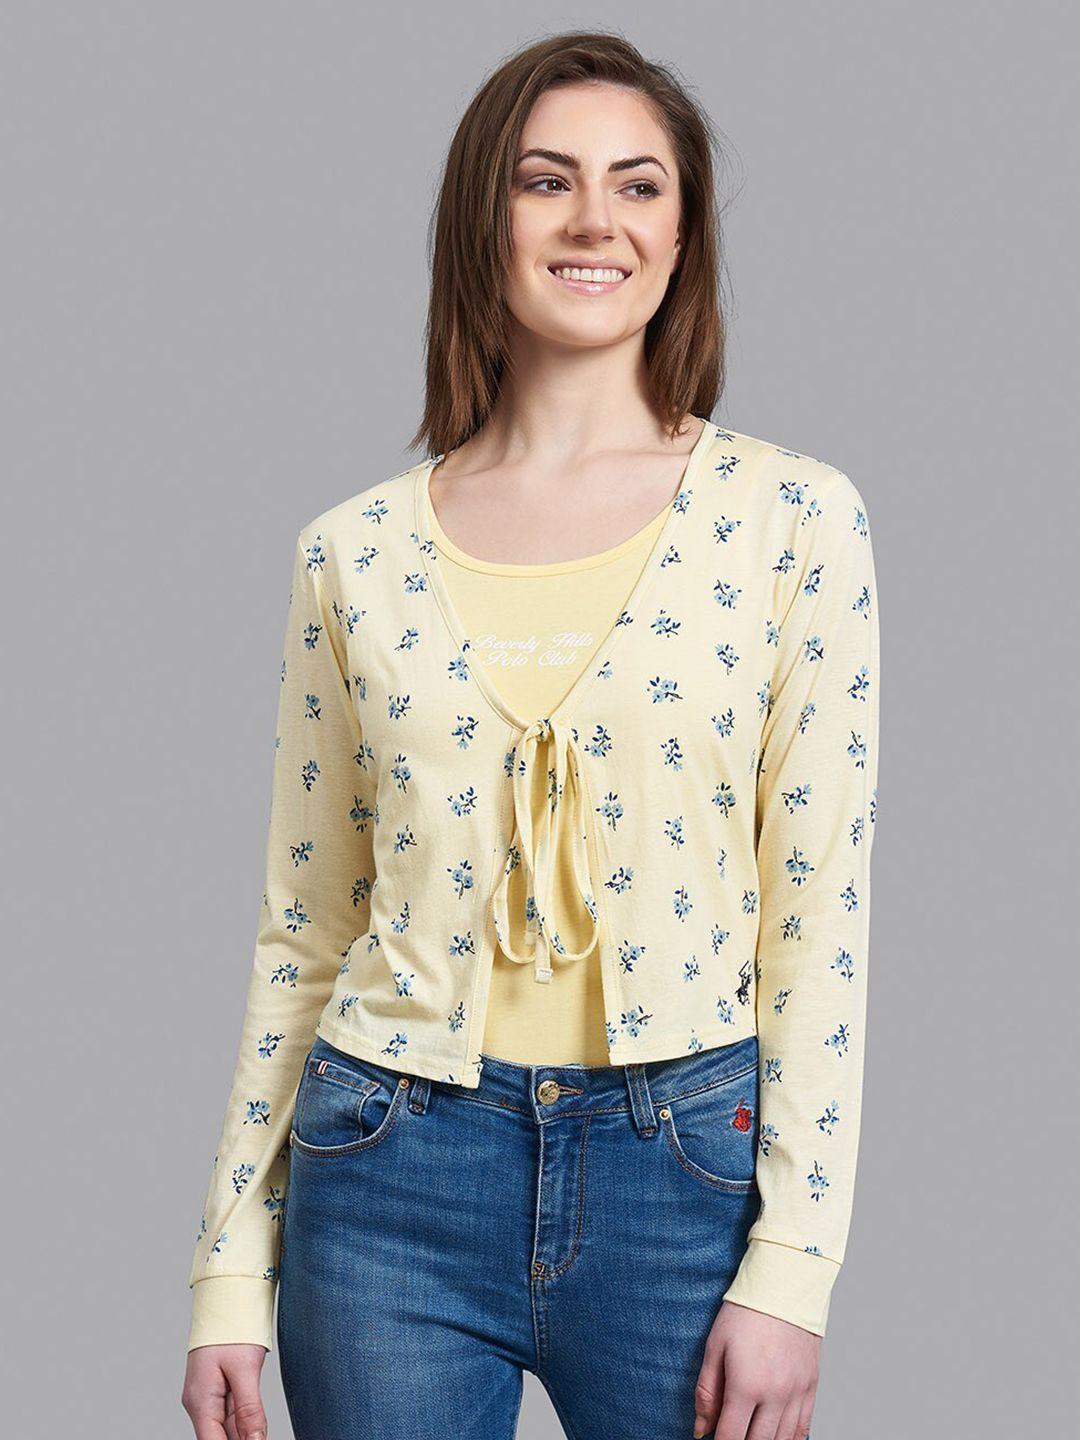 beverly hills polo club women yellow & blue floral printed cardigan